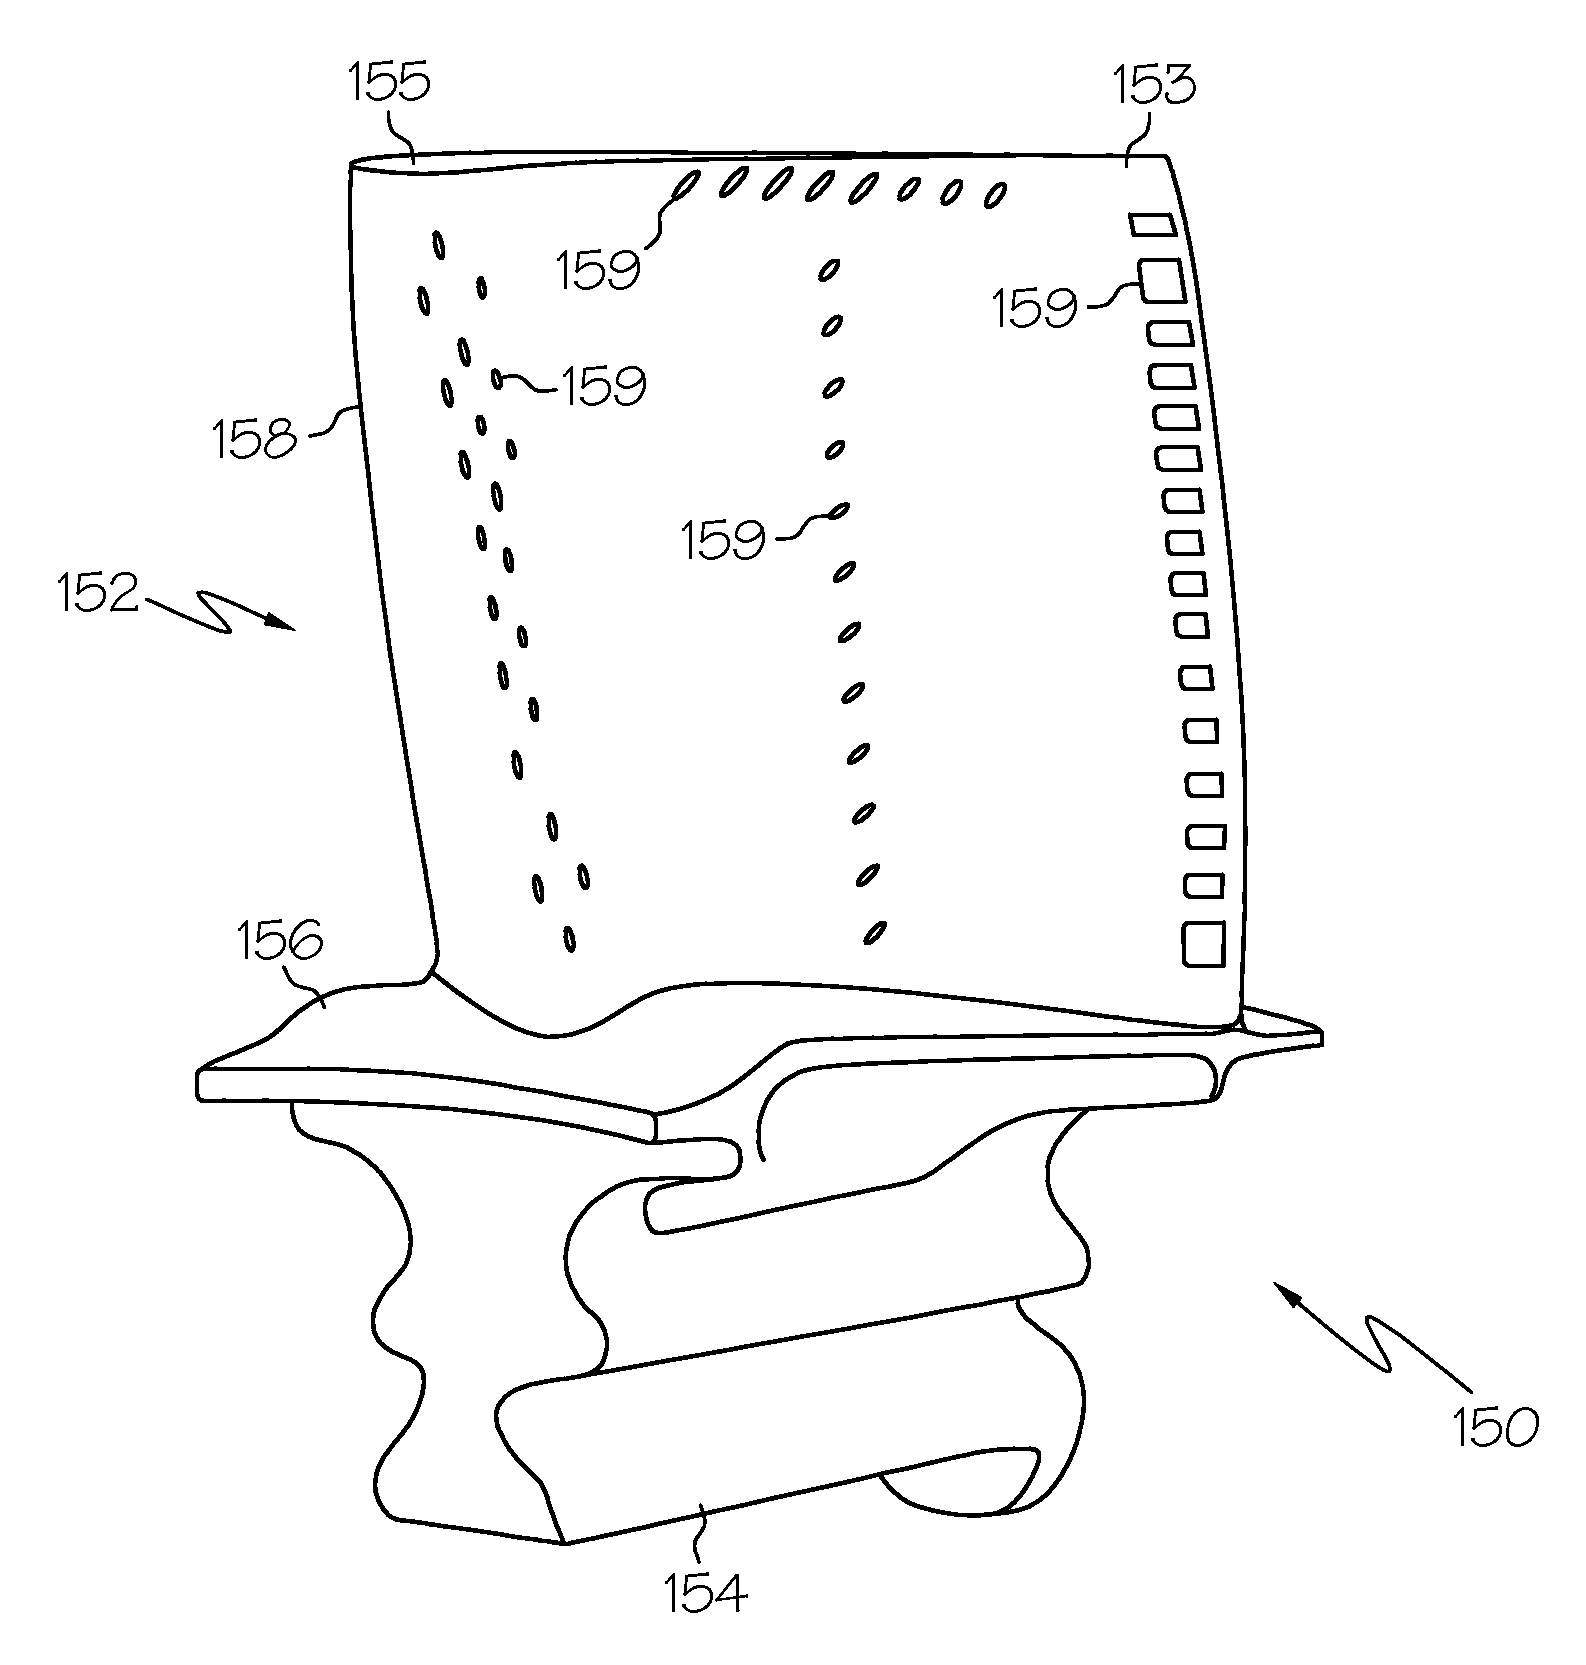 Superalloy compositions with improved oxidation performance and gas turbine components made therefrom